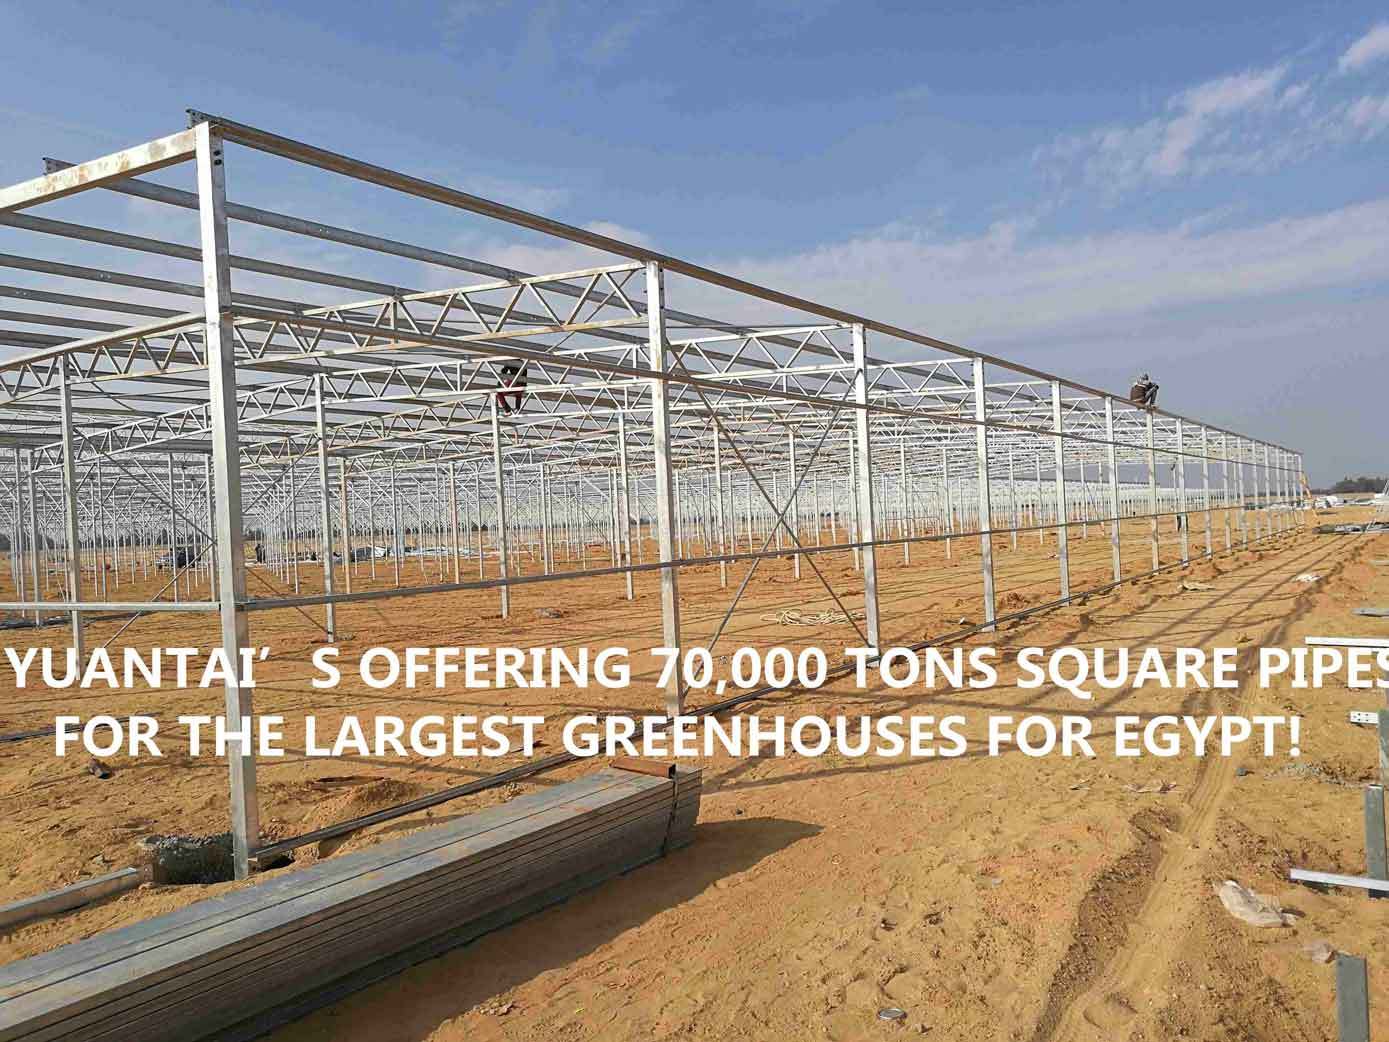 EGYPT GREENHOUSE PROJECT